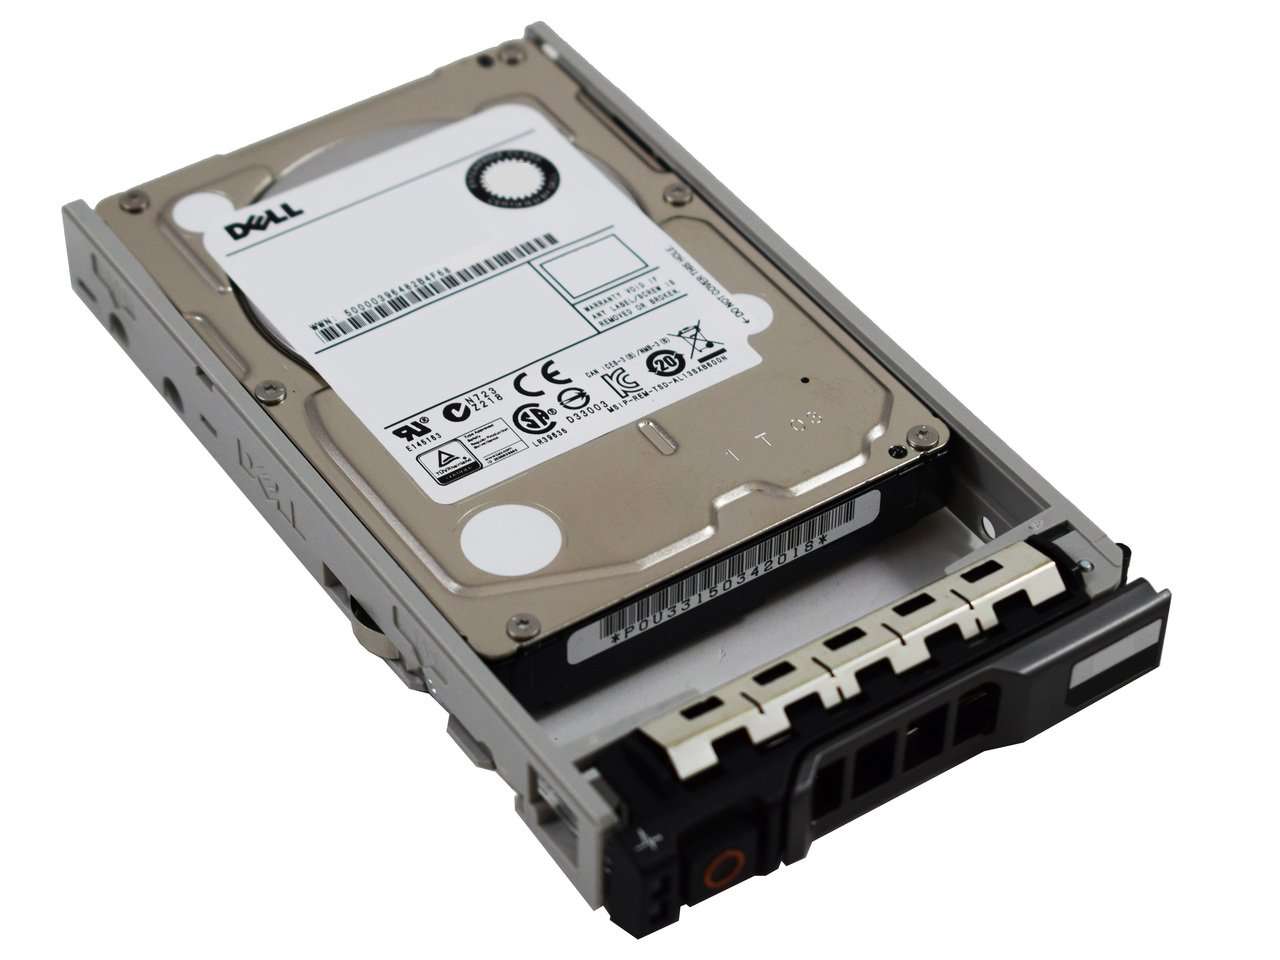 Dell G13 P6NW6 600GB 10K RPM SAS 6Gb/s 512n 2.5" Manufacturer Recertified HDD